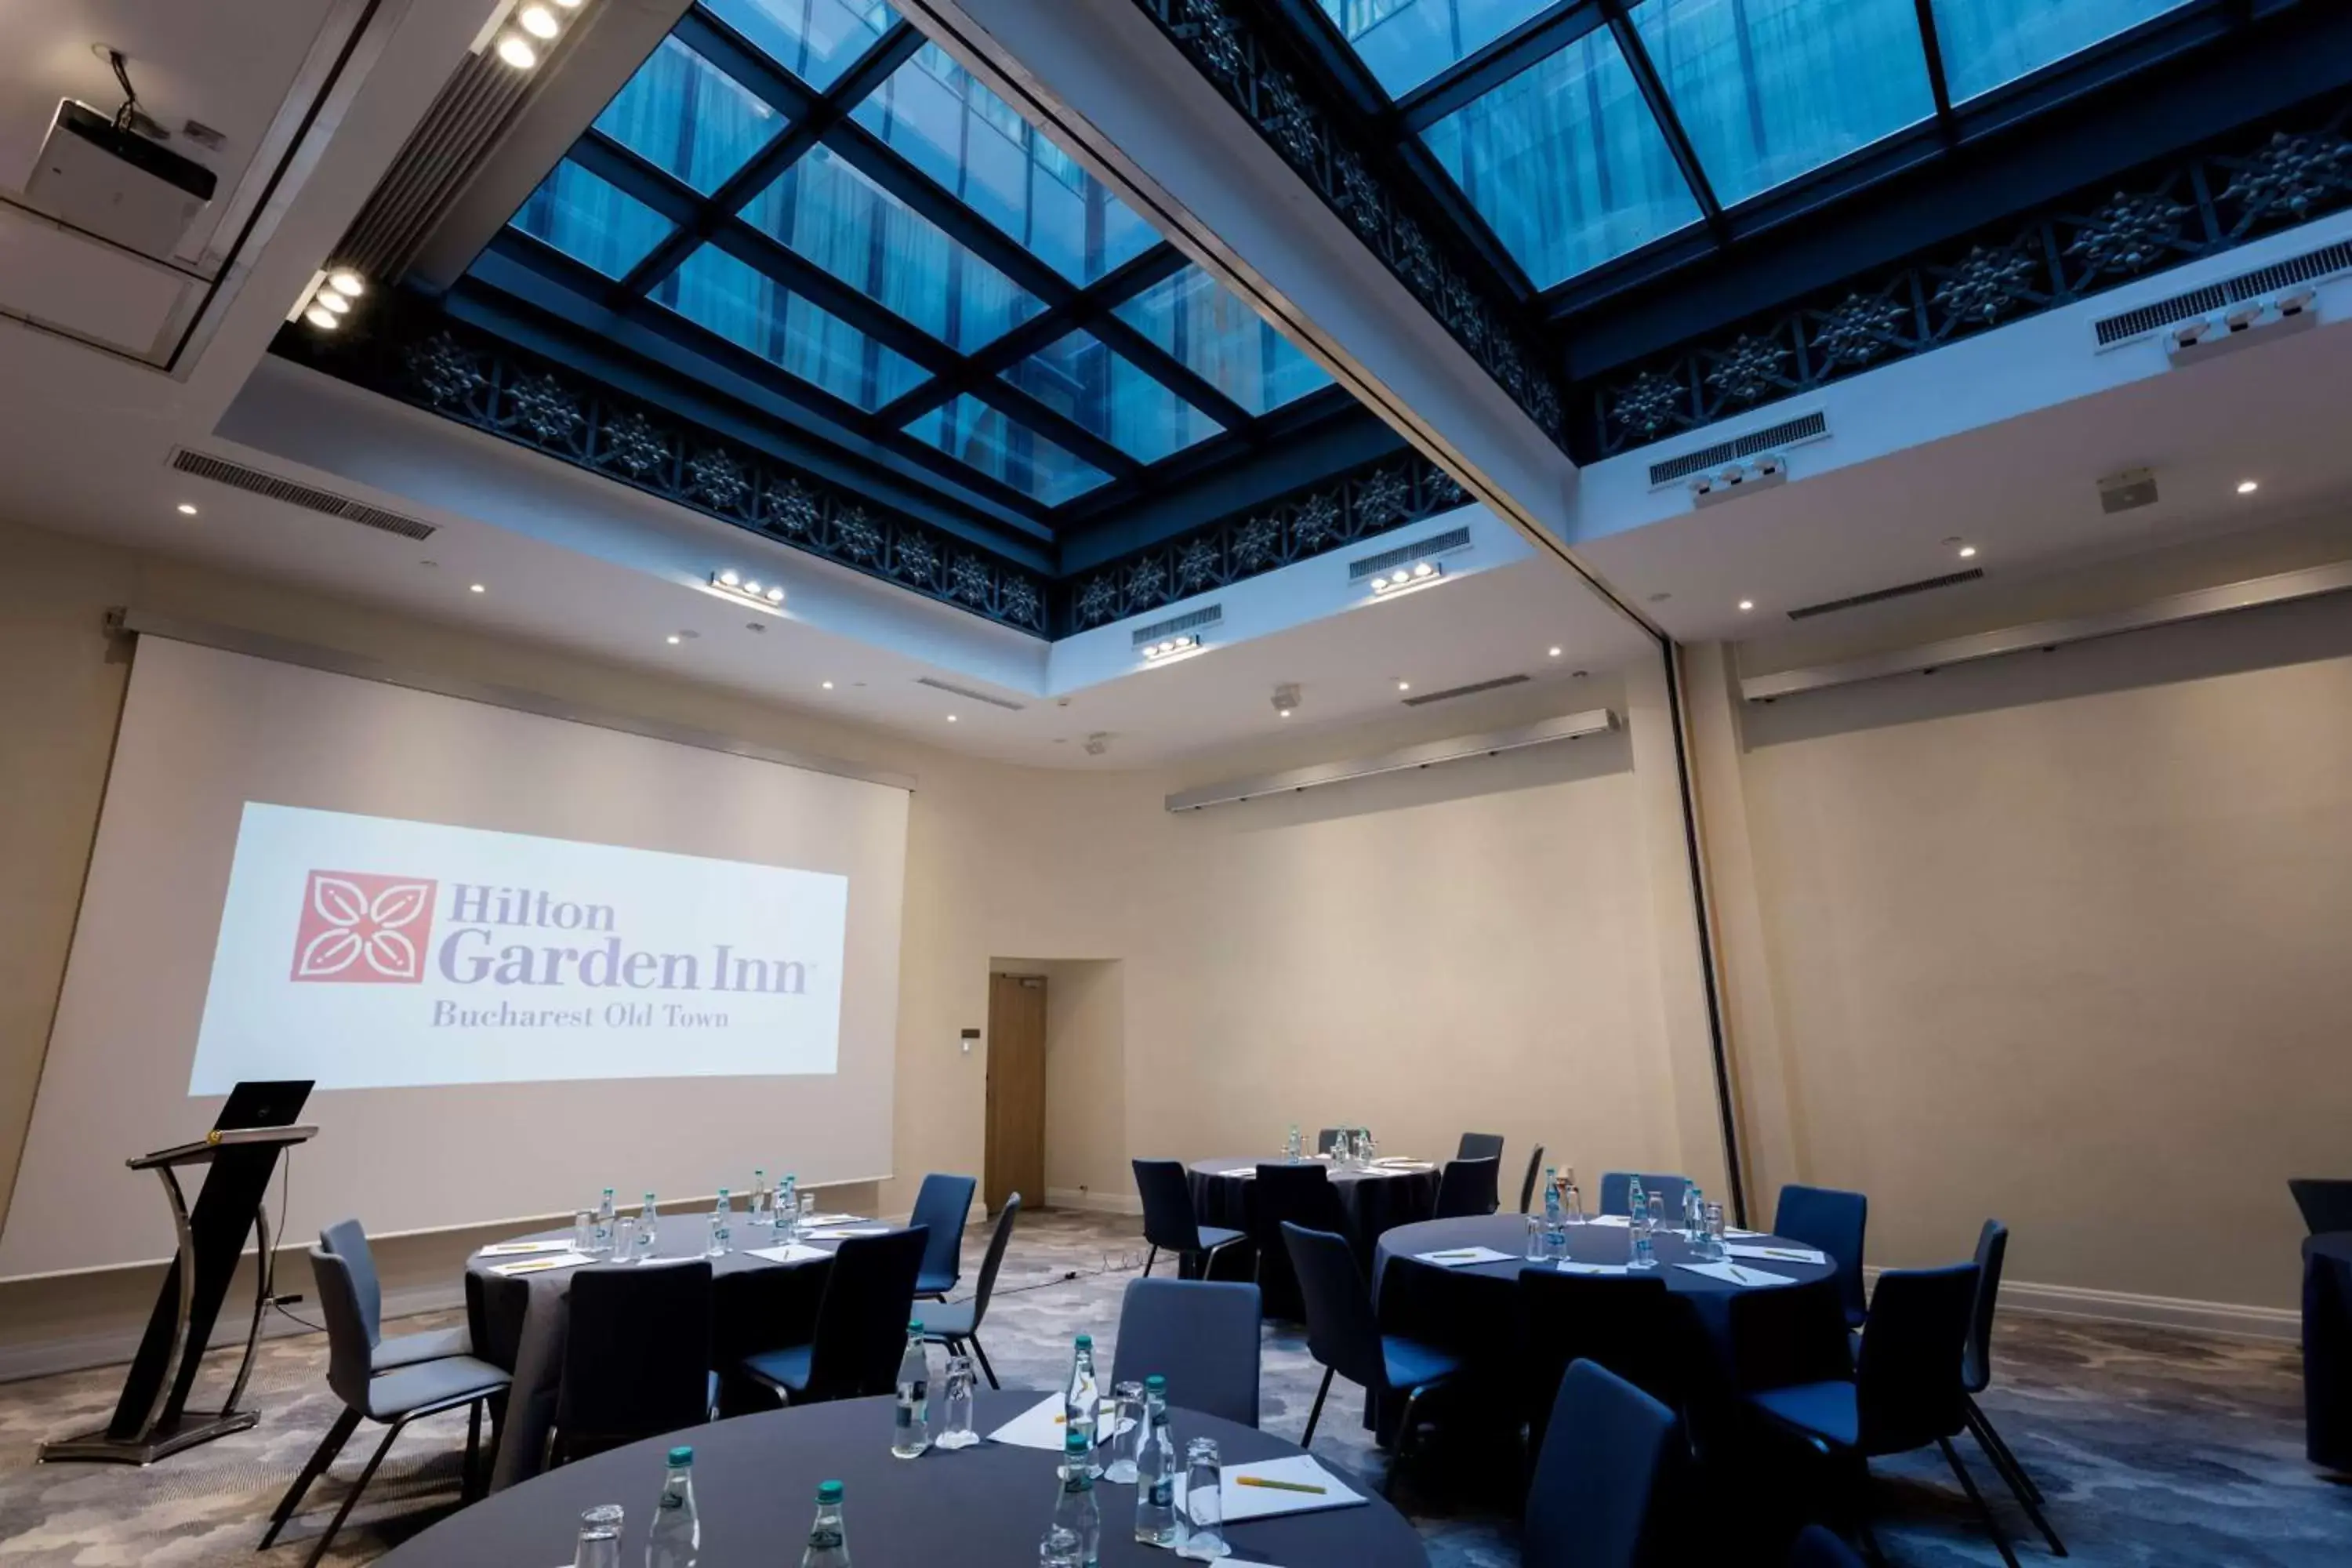 Meeting/conference room in Hilton Garden Inn Bucharest Old Town